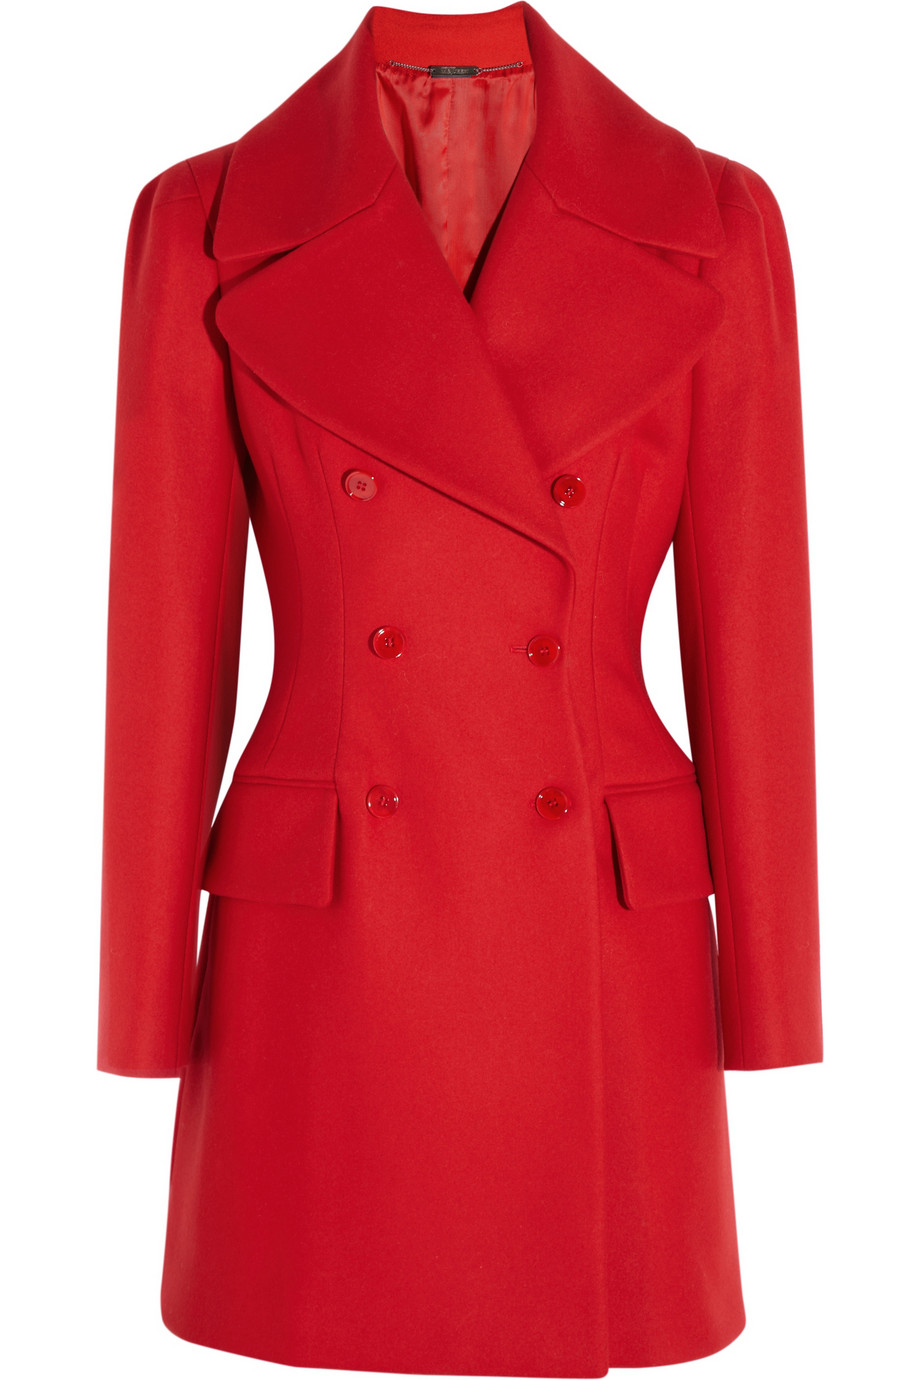 Lyst - Alexander mcqueen Wool and Cashmere blend Felt Coat in Red